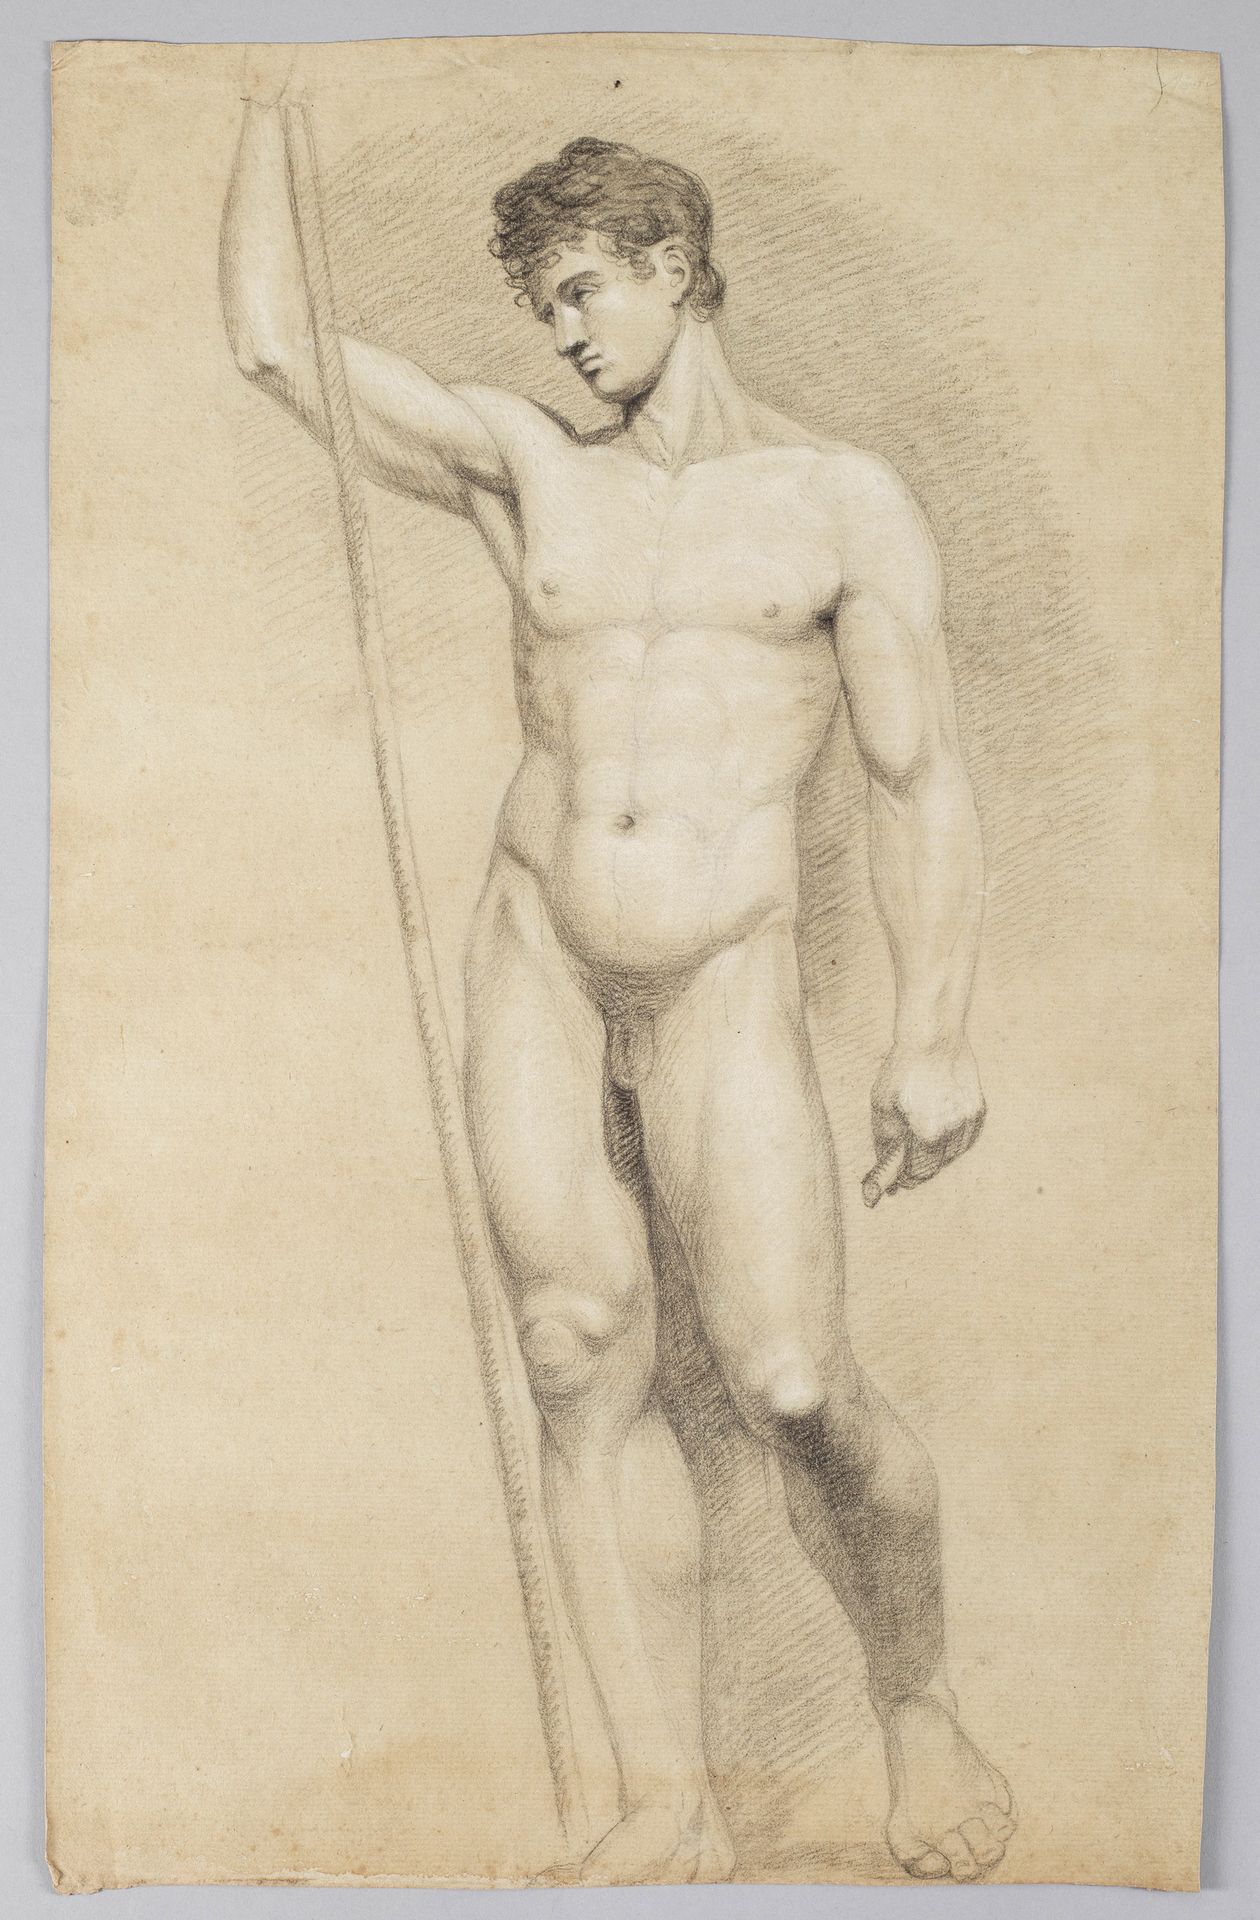 Null Johann Heinrich Beck (1788 Dessau - 1875 ibid.)
Nude study of a youth with &hellip;